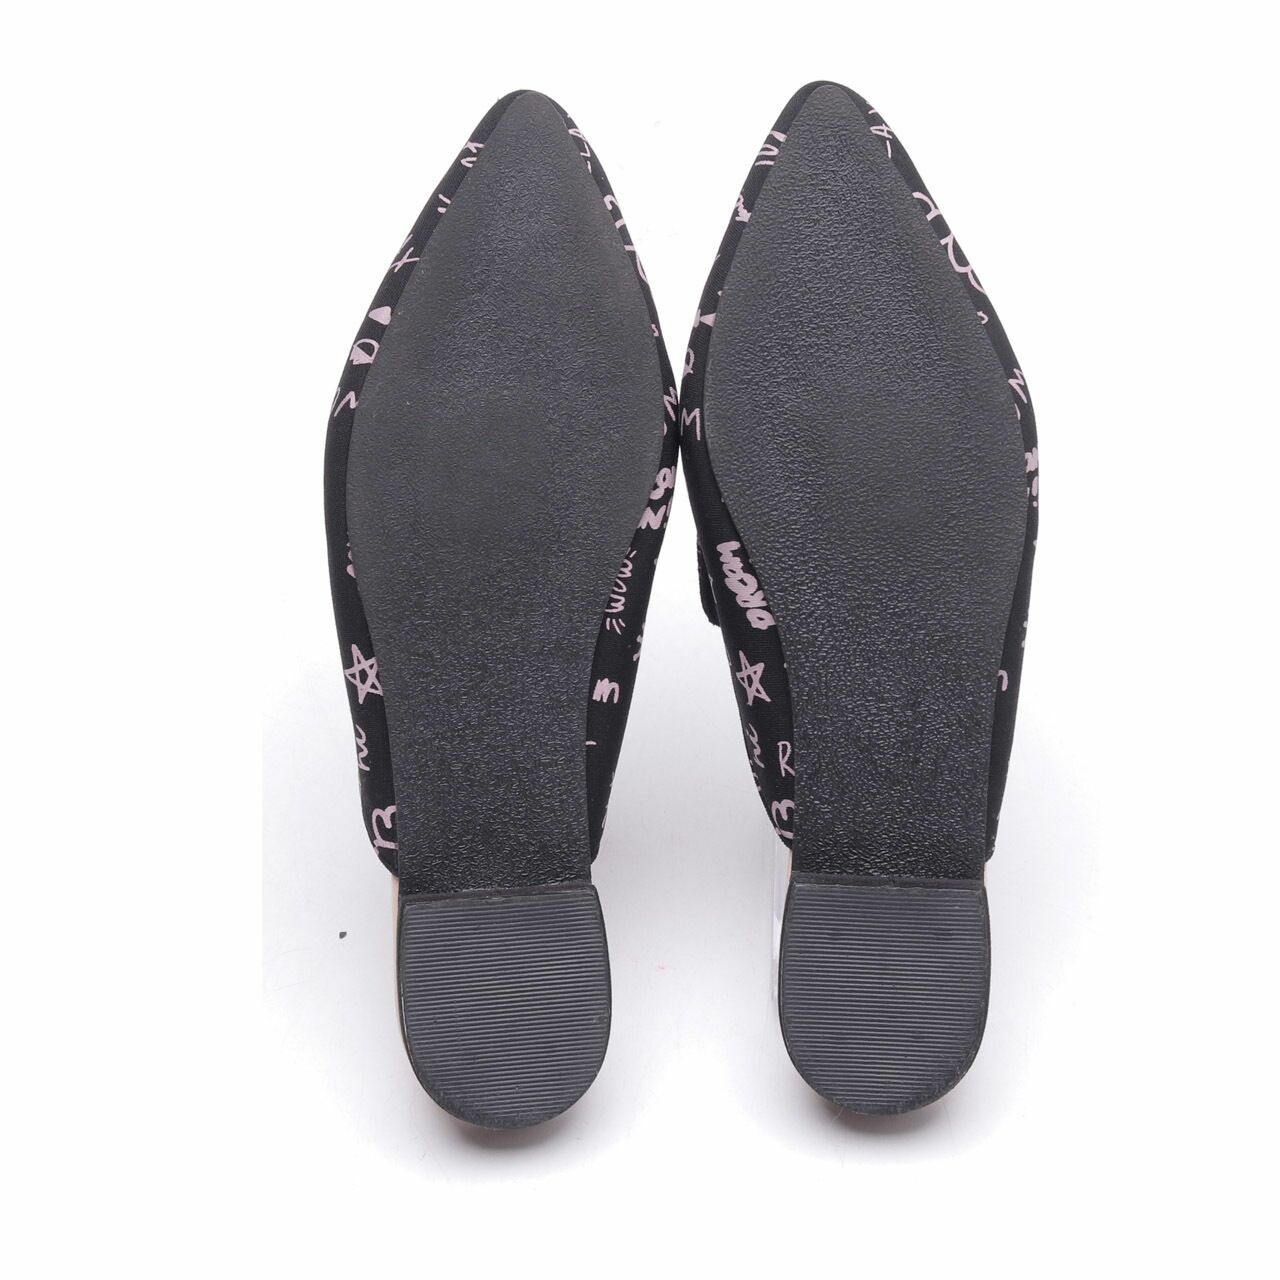 Valencia By Enrica Sassy Flats In Pebble Black Mules